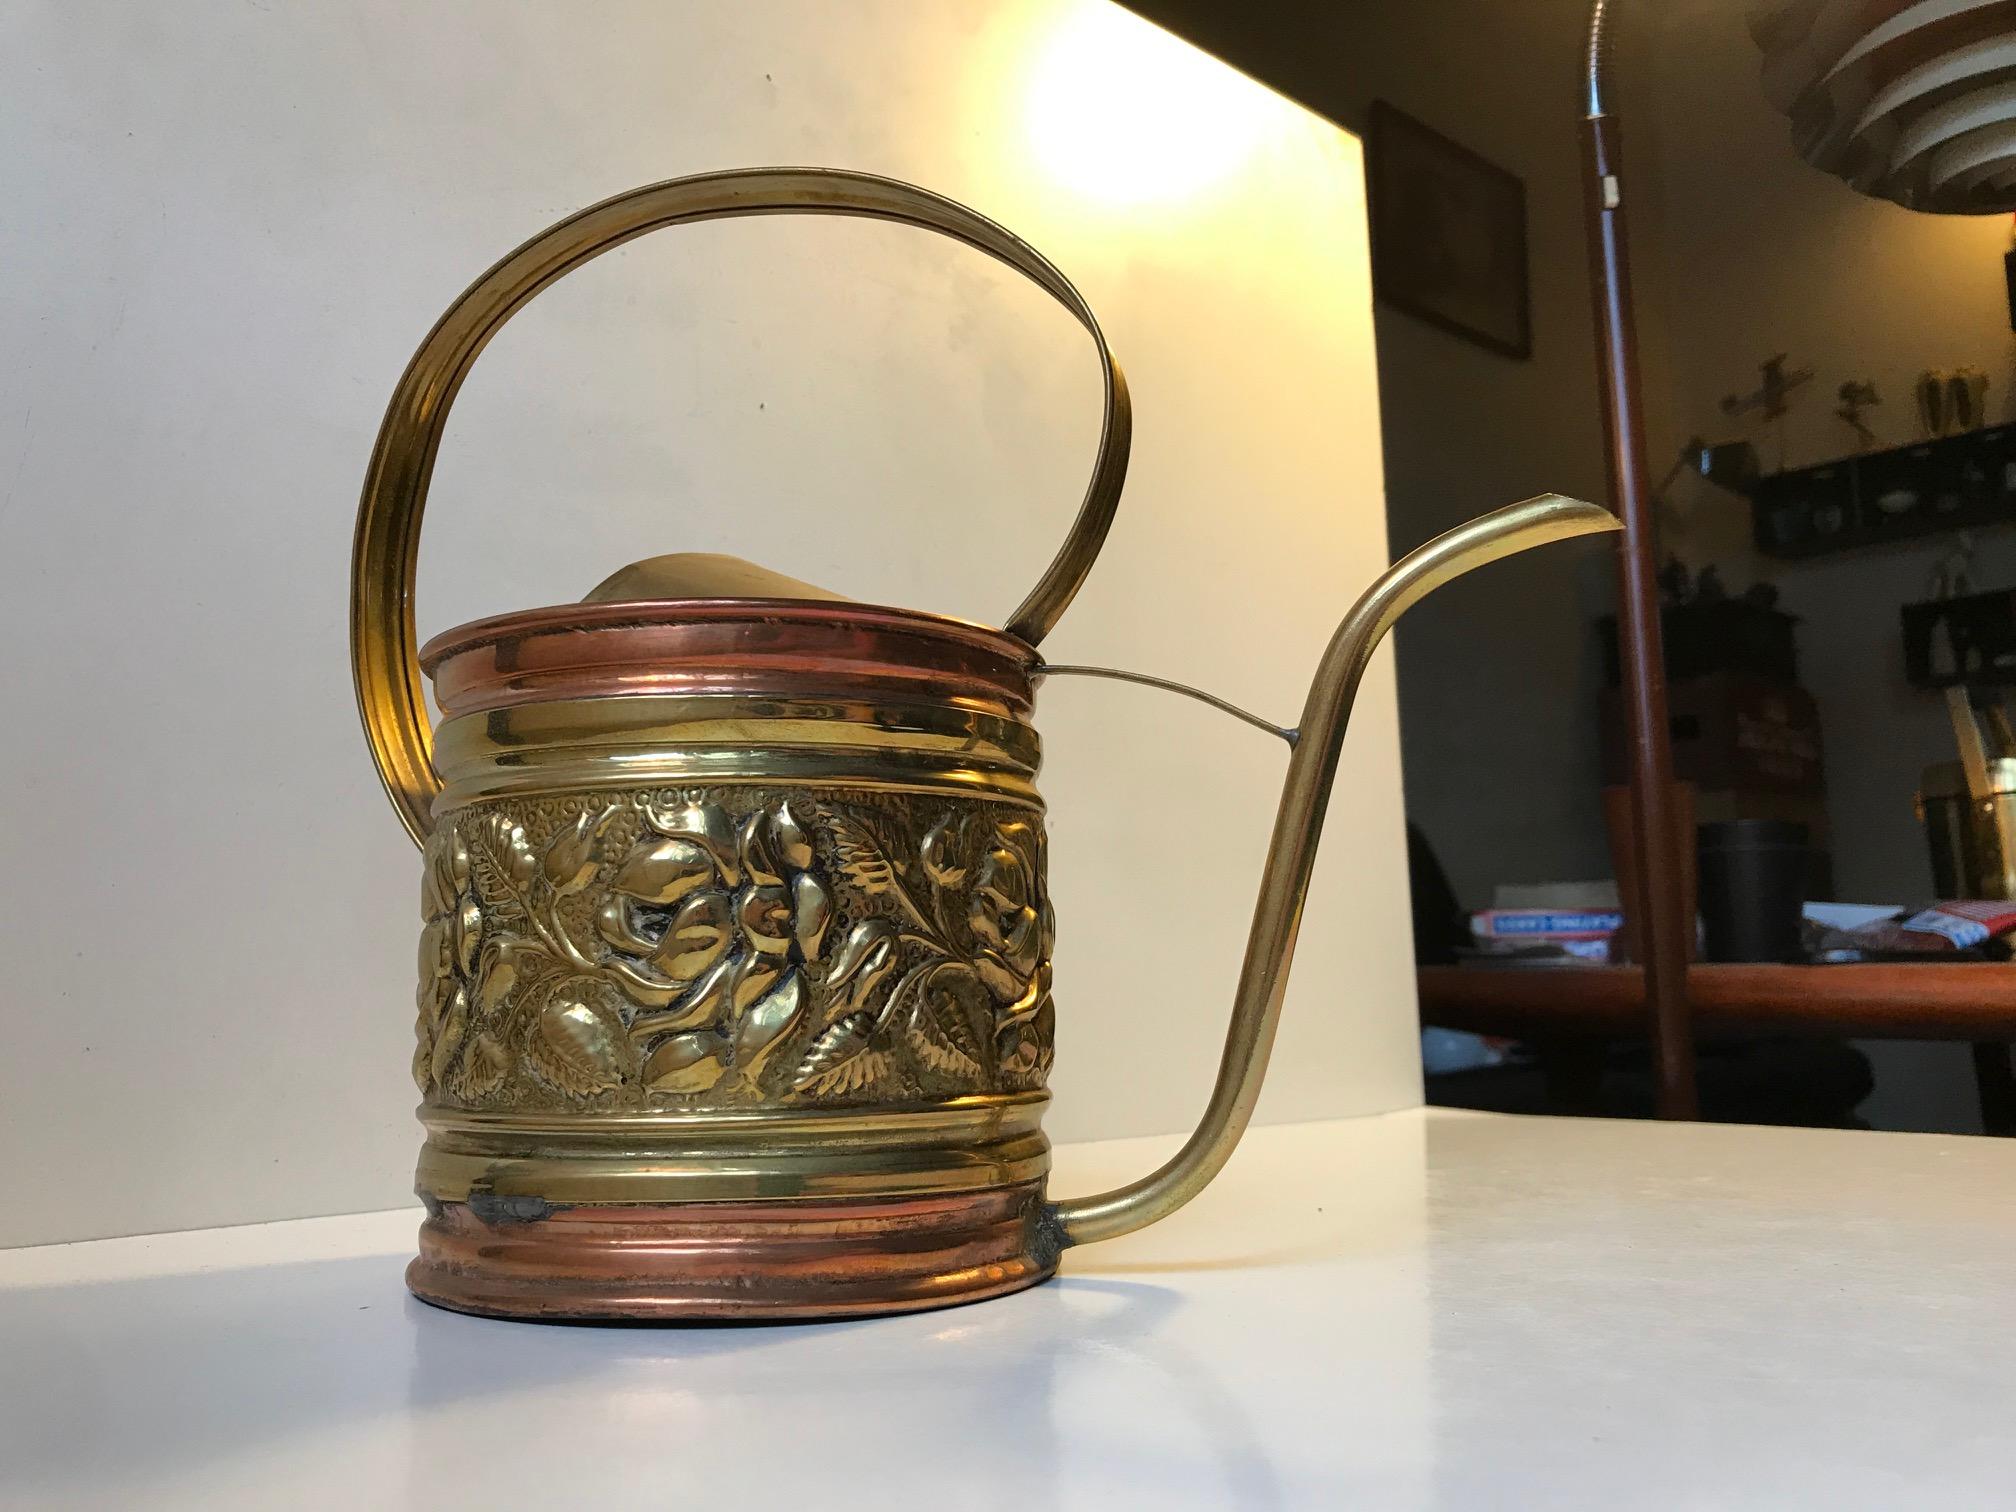 A large copper watering can executed with punched mid-section in brass. Its made in England in the early 20th century. This particular example been loved and it shows several body repairs to keep the water in. It no longer has leaks nor dents or